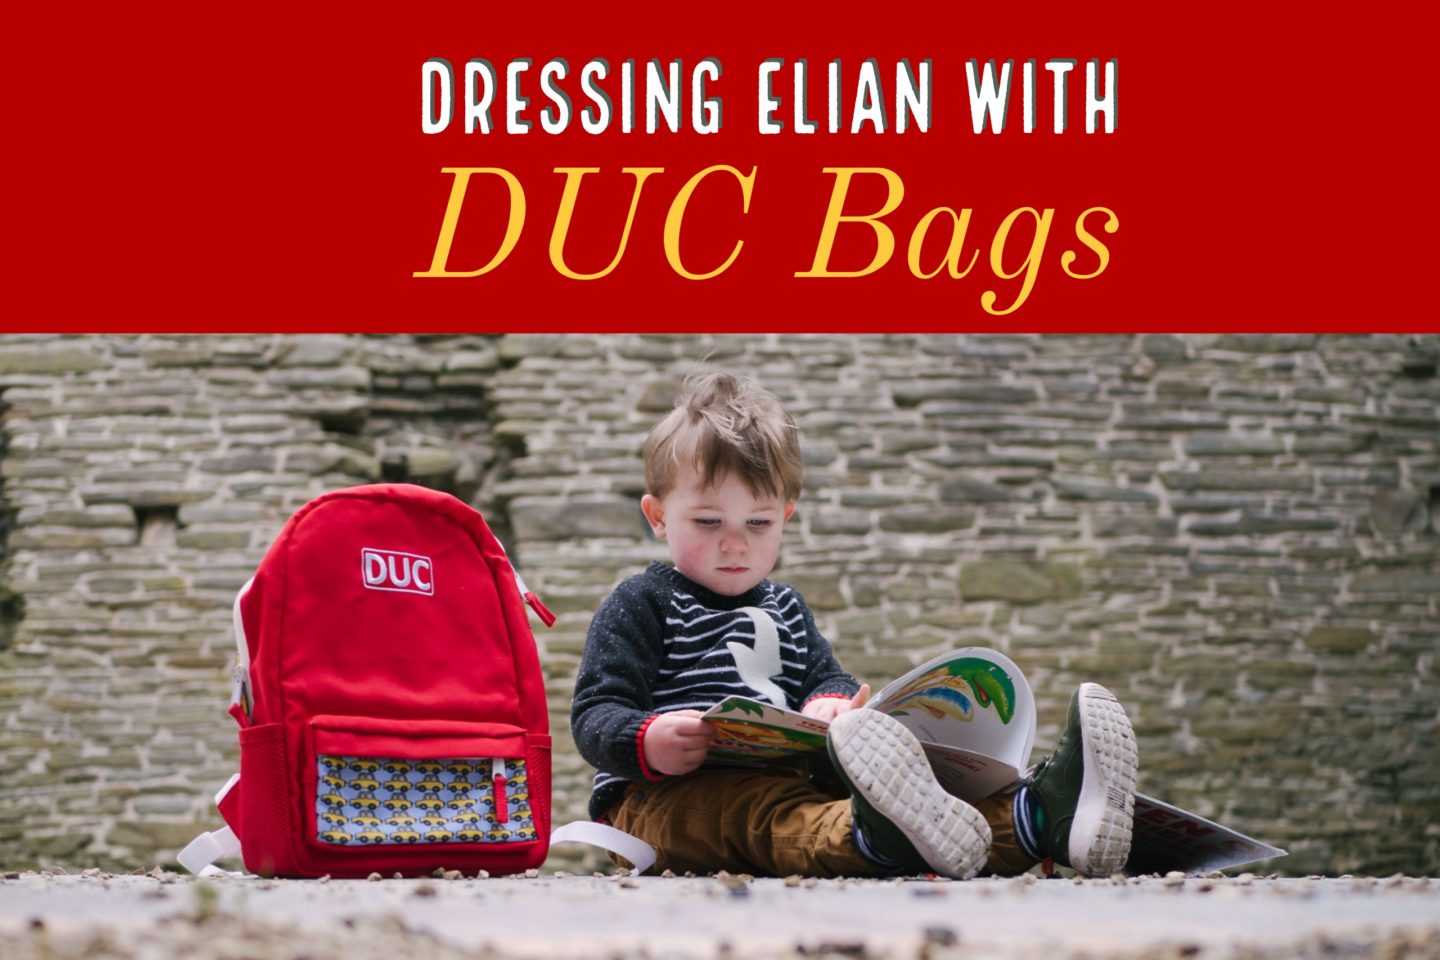 Kids Fashion // Dressing Elian with DUC Bags – Ethical 1 for 1 Bag Company Helping Children in Vietnam